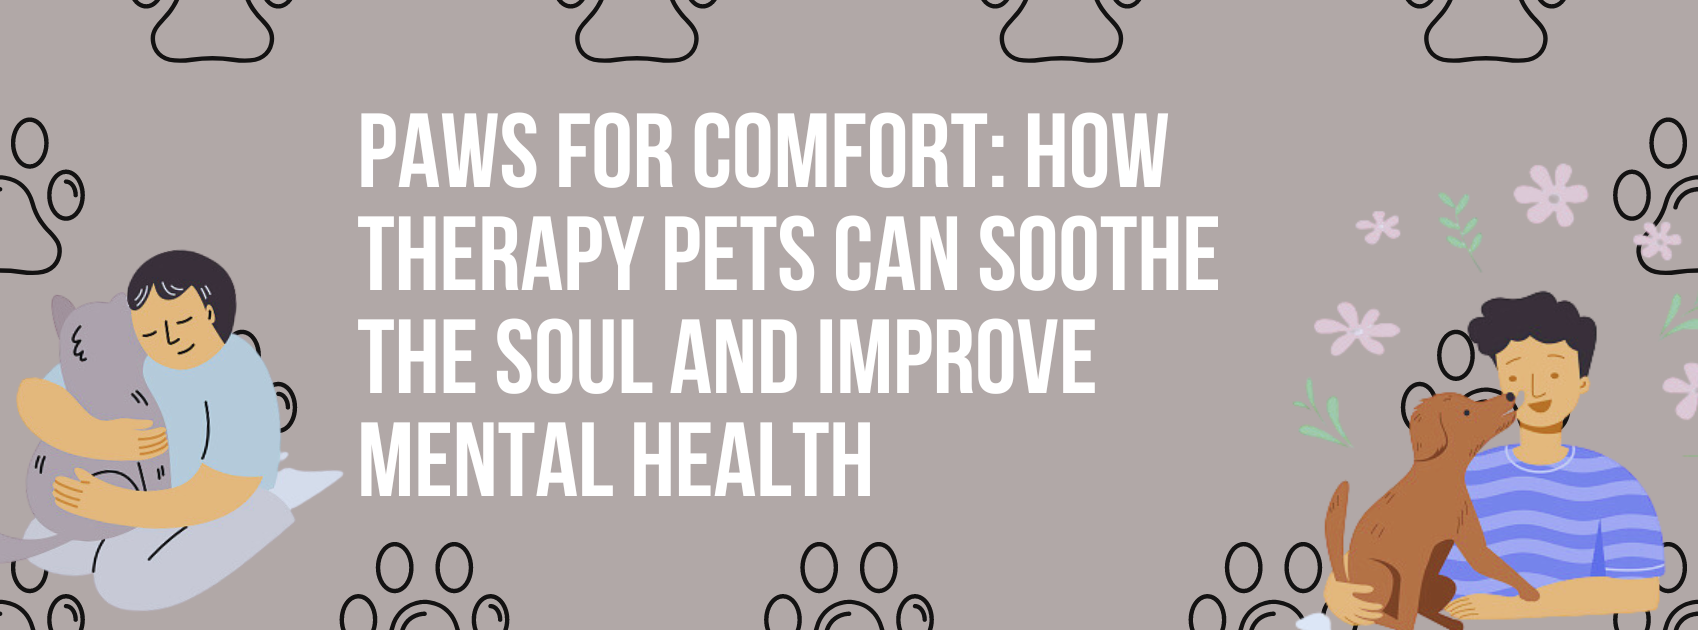 Paws for Comfort: How Therapy Pets Can Soothe the Soul and Improve Mental Health